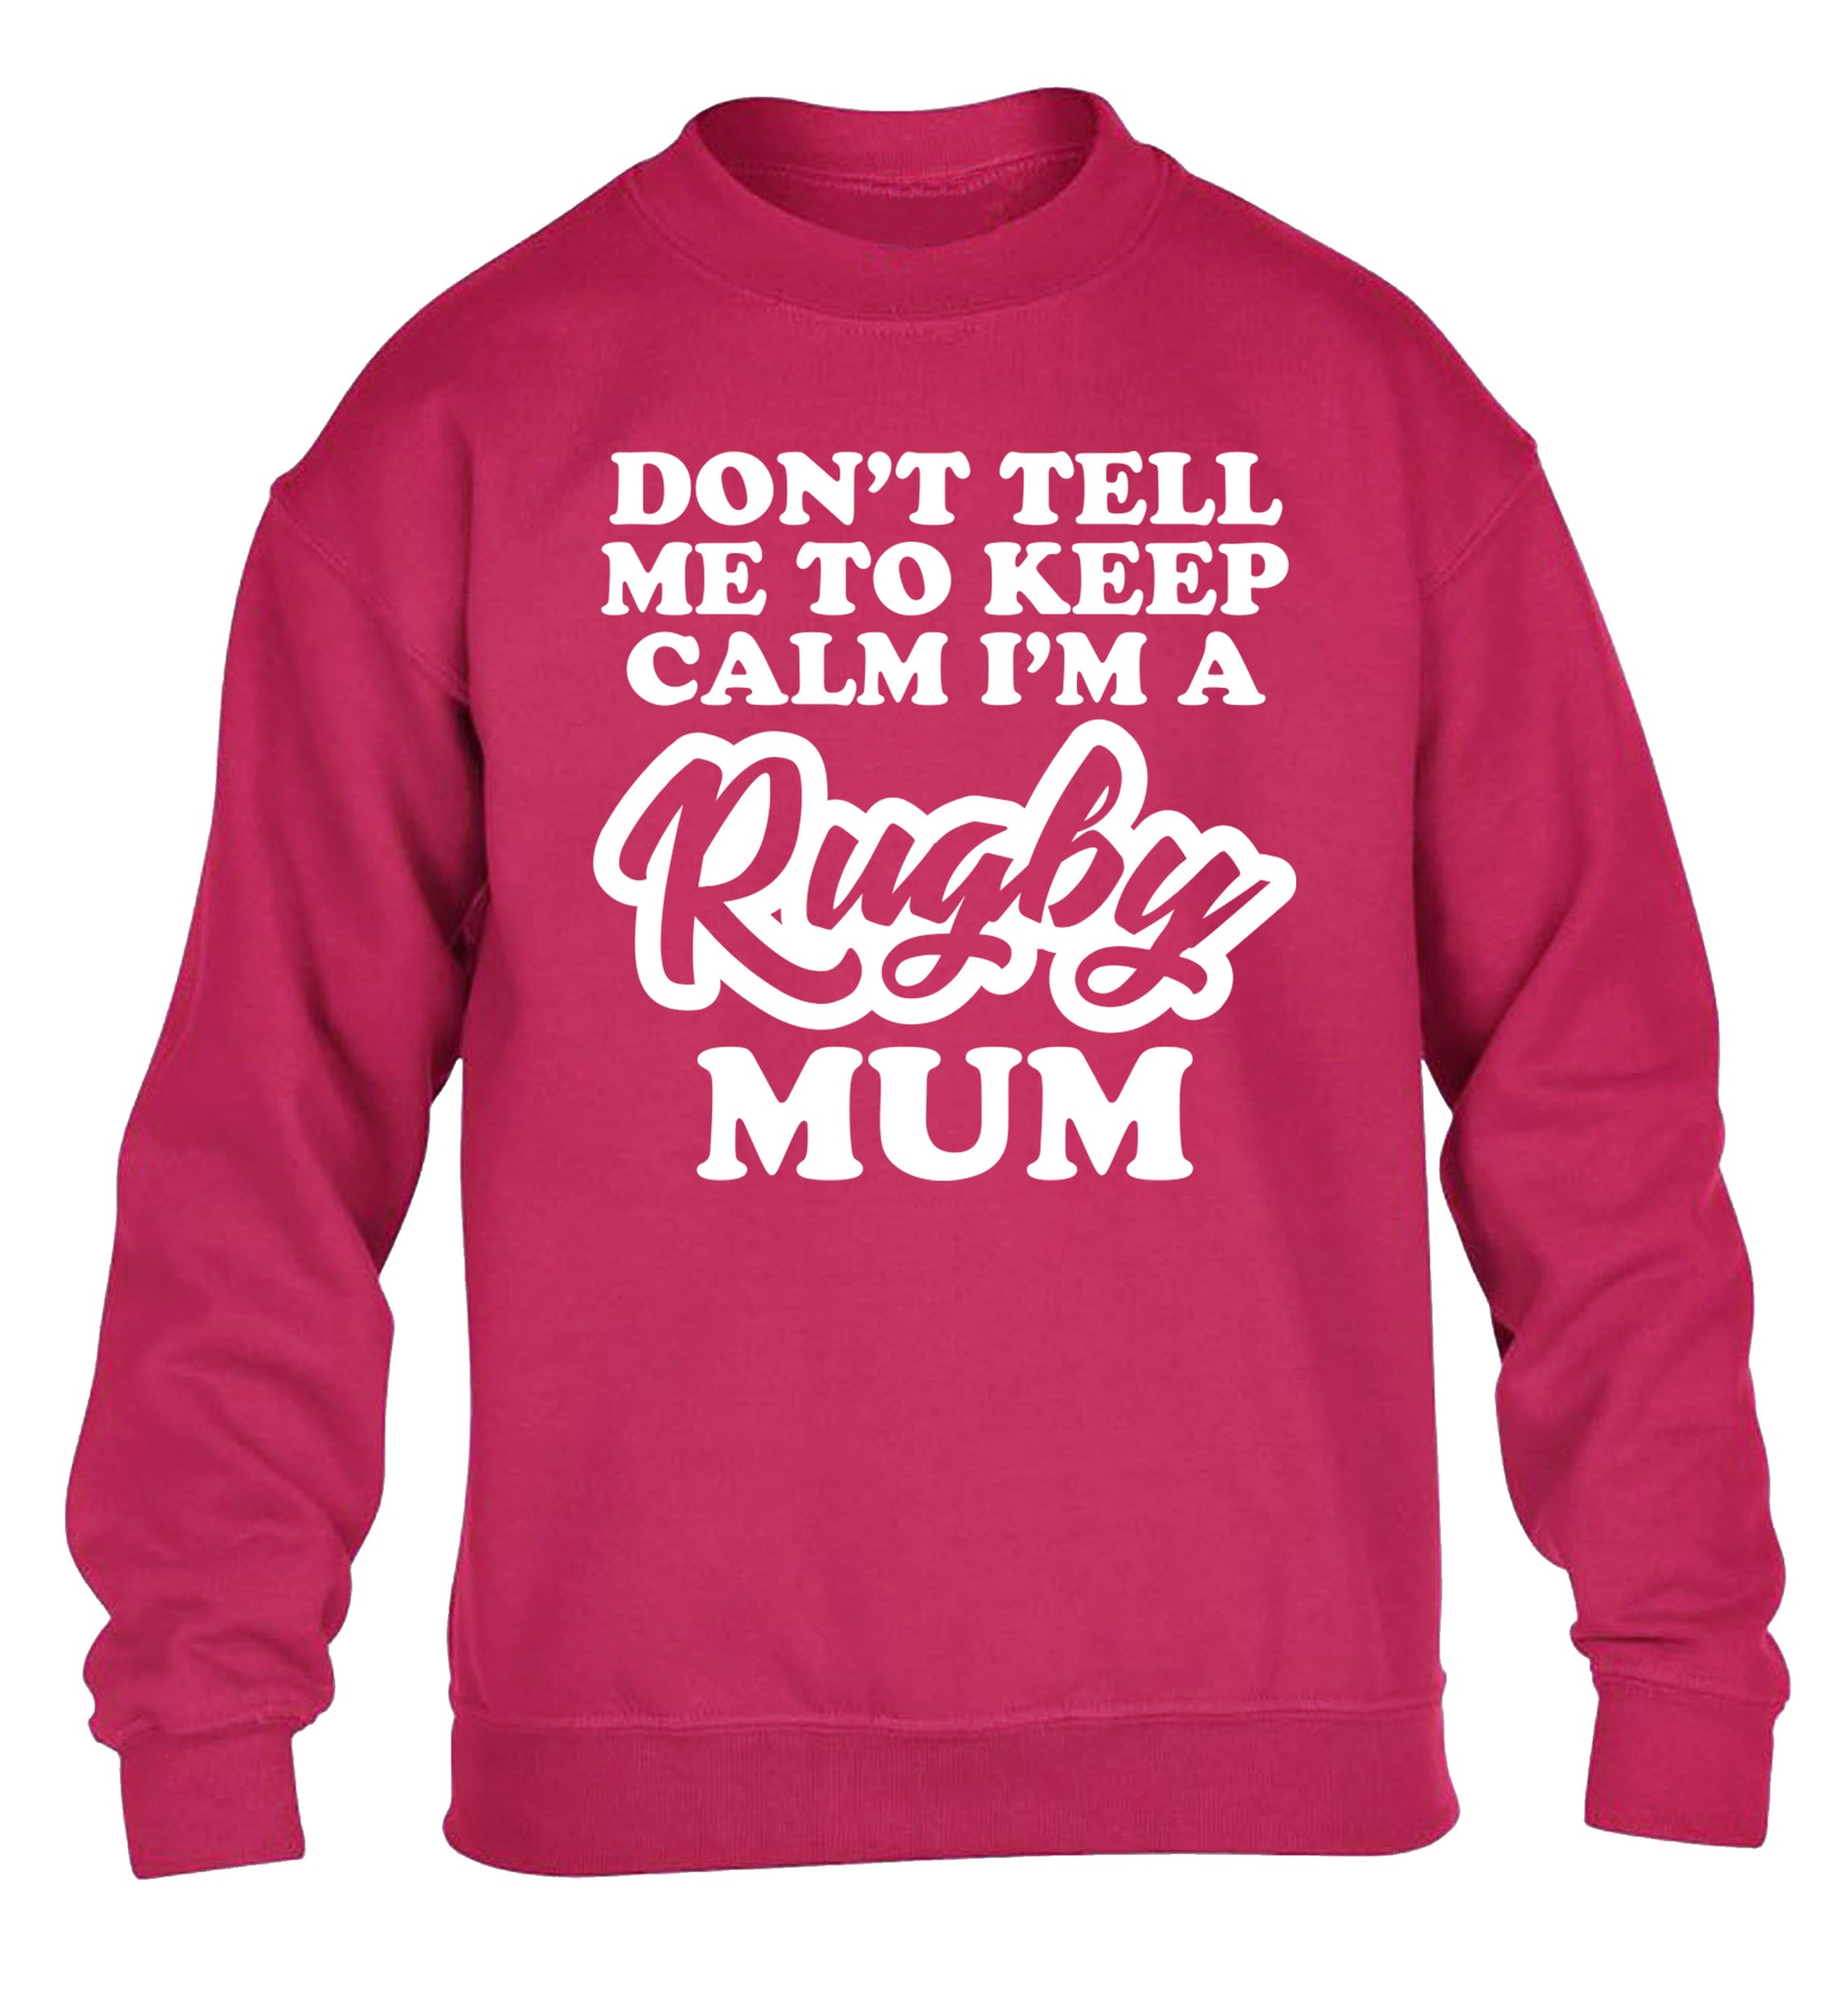 Don't tell me to keep calm I'm a rugby mum children's pink sweater 12-13 Years